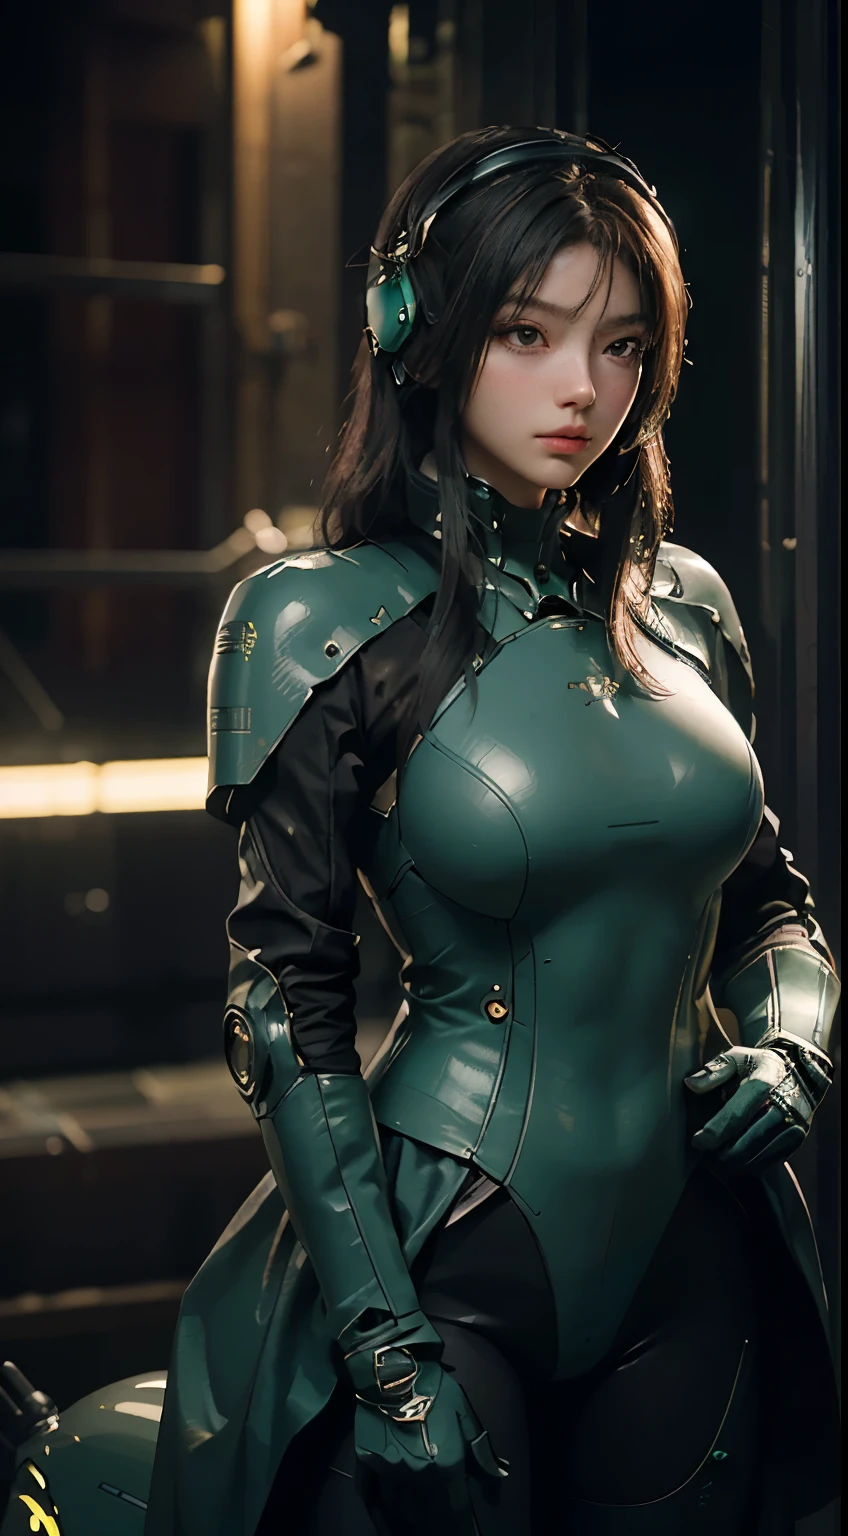 Highest image quality, Excellent details, ultra high resolution, (Reality: 1.4), best illustrations, Offer details, Highly concentrated 1girl, Has a delicate and beautiful face, Dressed in black and green mechs, wearing a mech helmet, holding direction, riding a motorcycle, Background futuristic city high tech lighting scene.